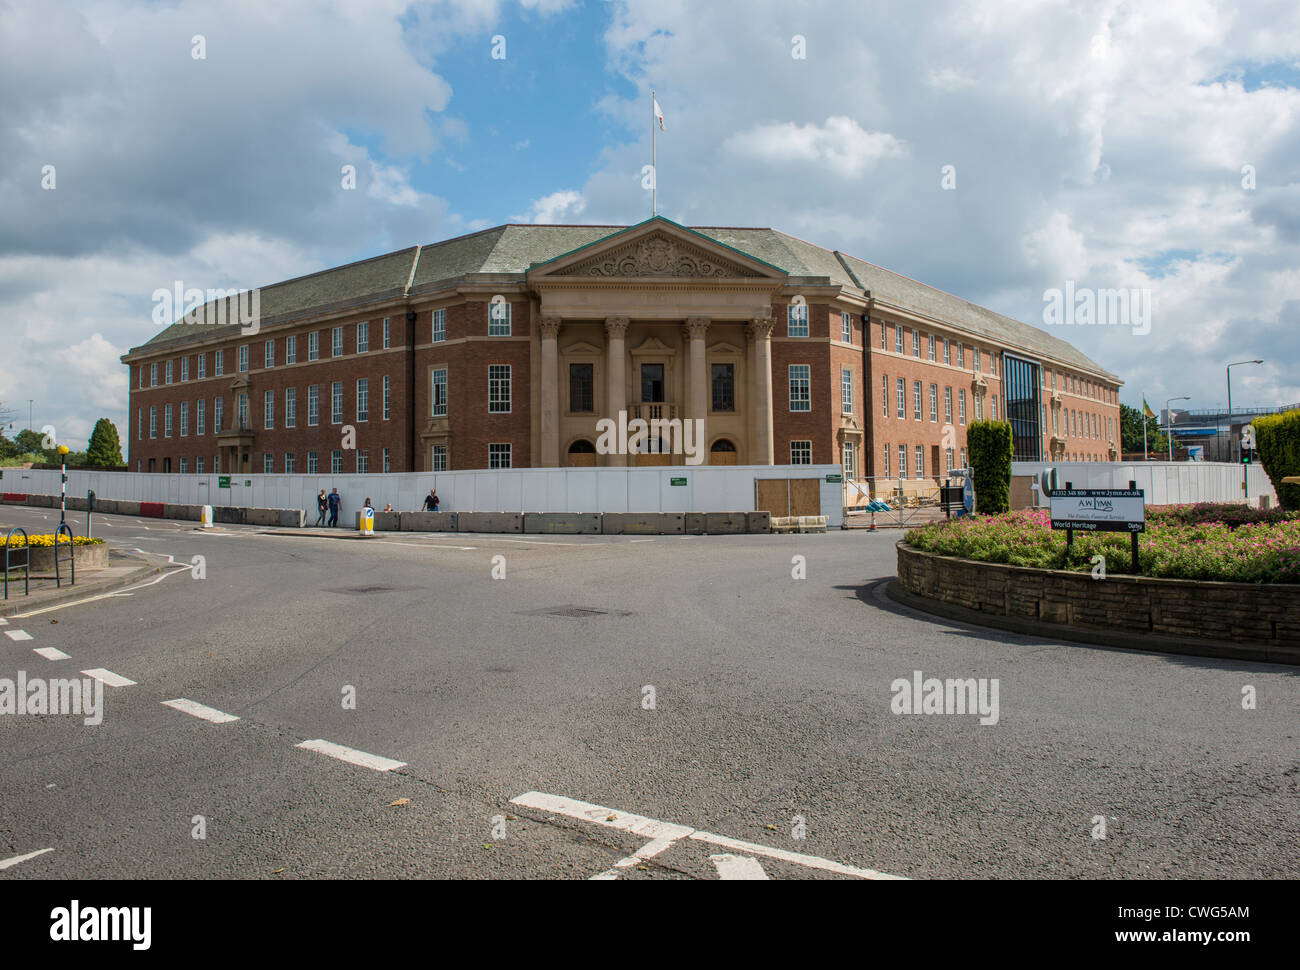 Derby Council House hoarded off for refurbishment work. Stock Photo